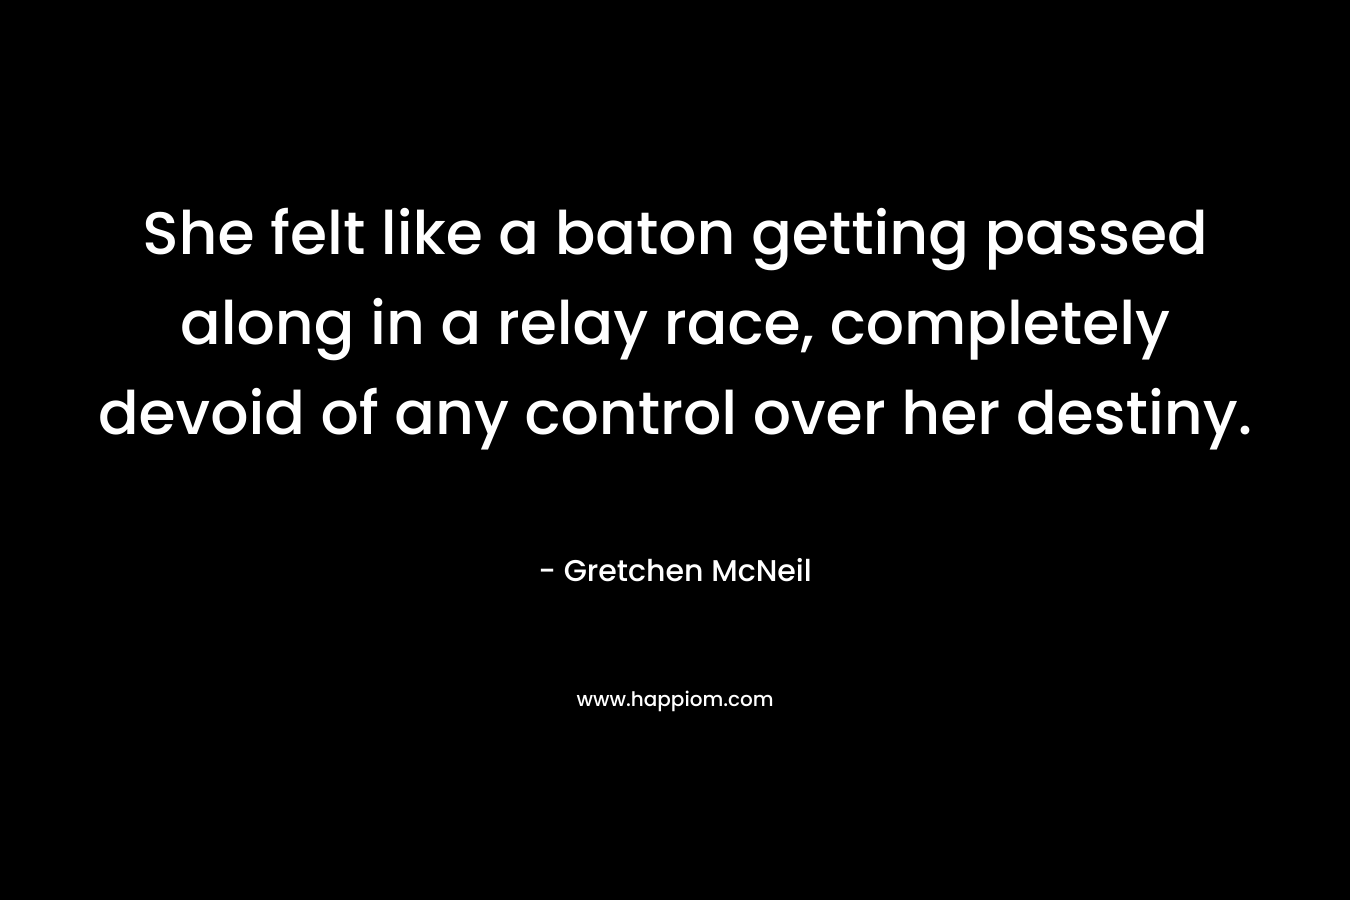 She felt like a baton getting passed along in a relay race, completely devoid of any control over her destiny. – Gretchen McNeil